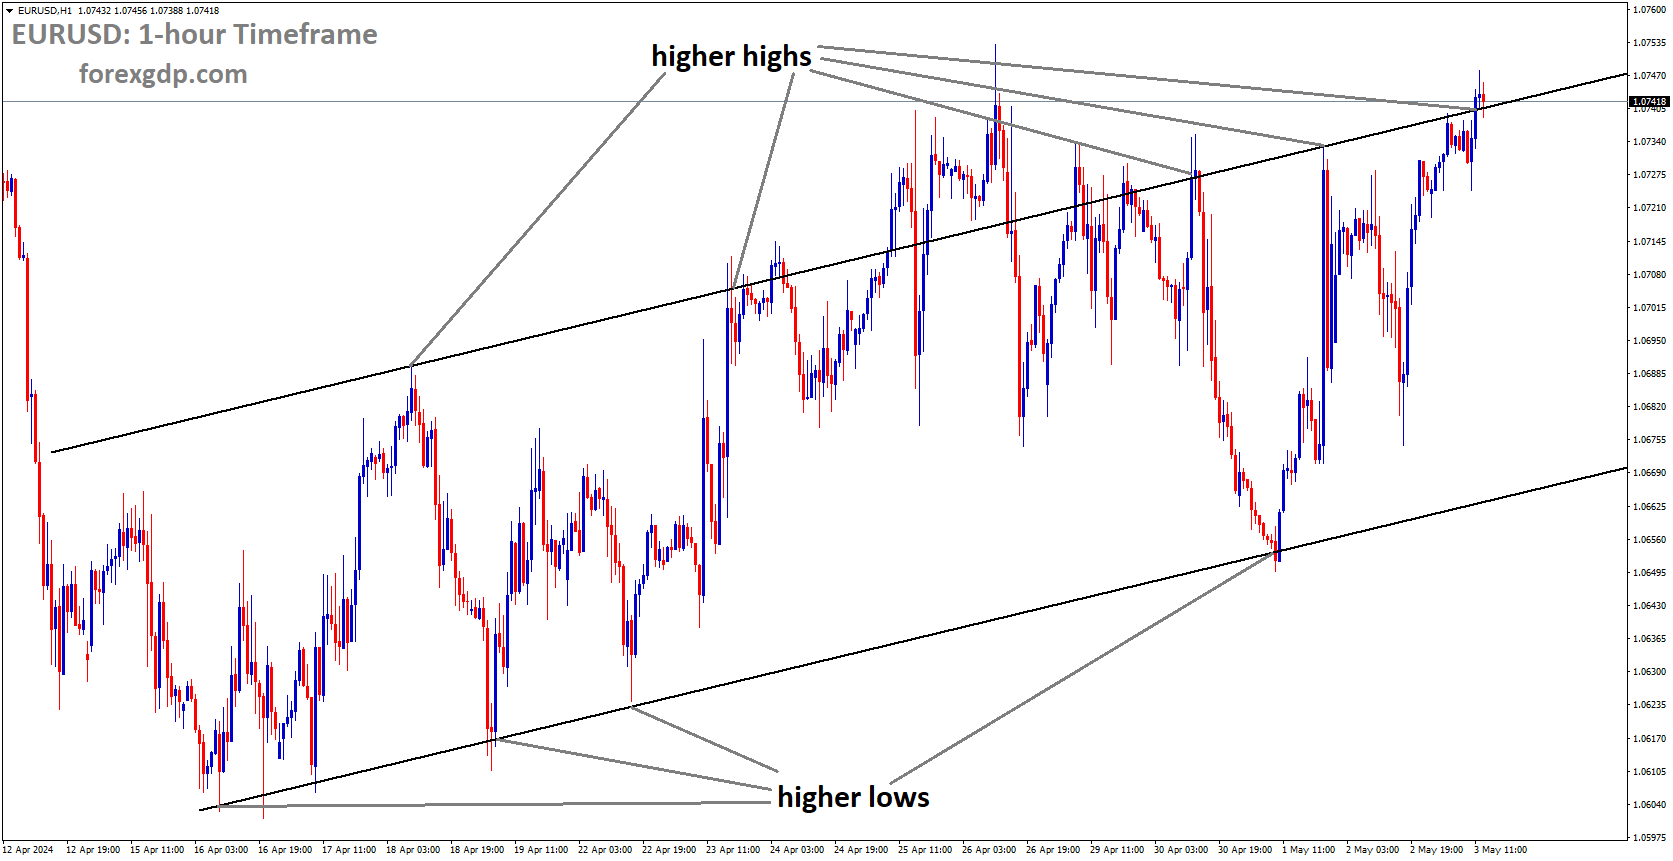 EURUSD is moving in Ascending channel and market has reached higher high area of the channel